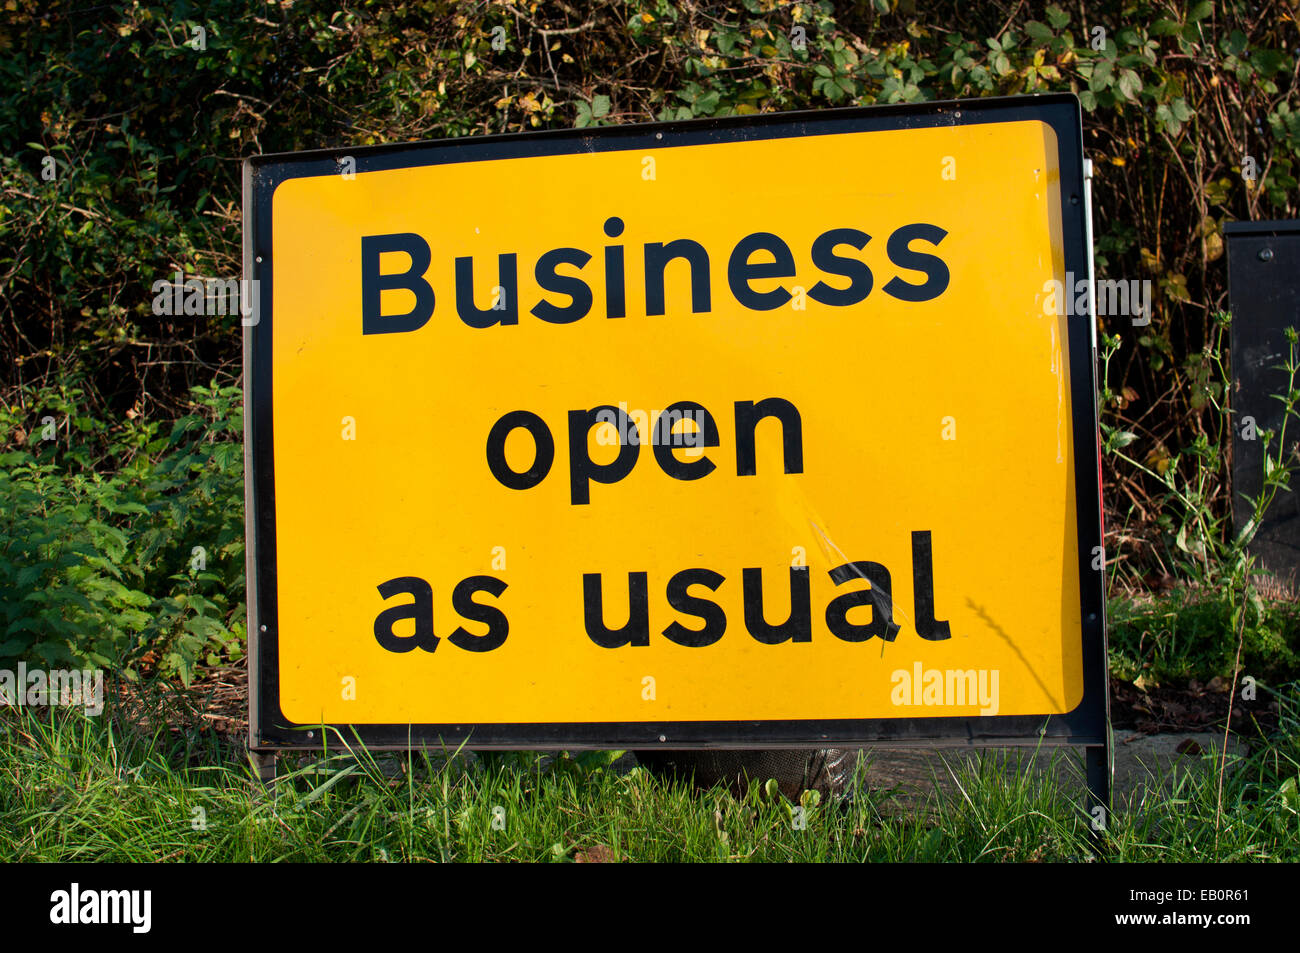 Business open as usual sign Stock Photo